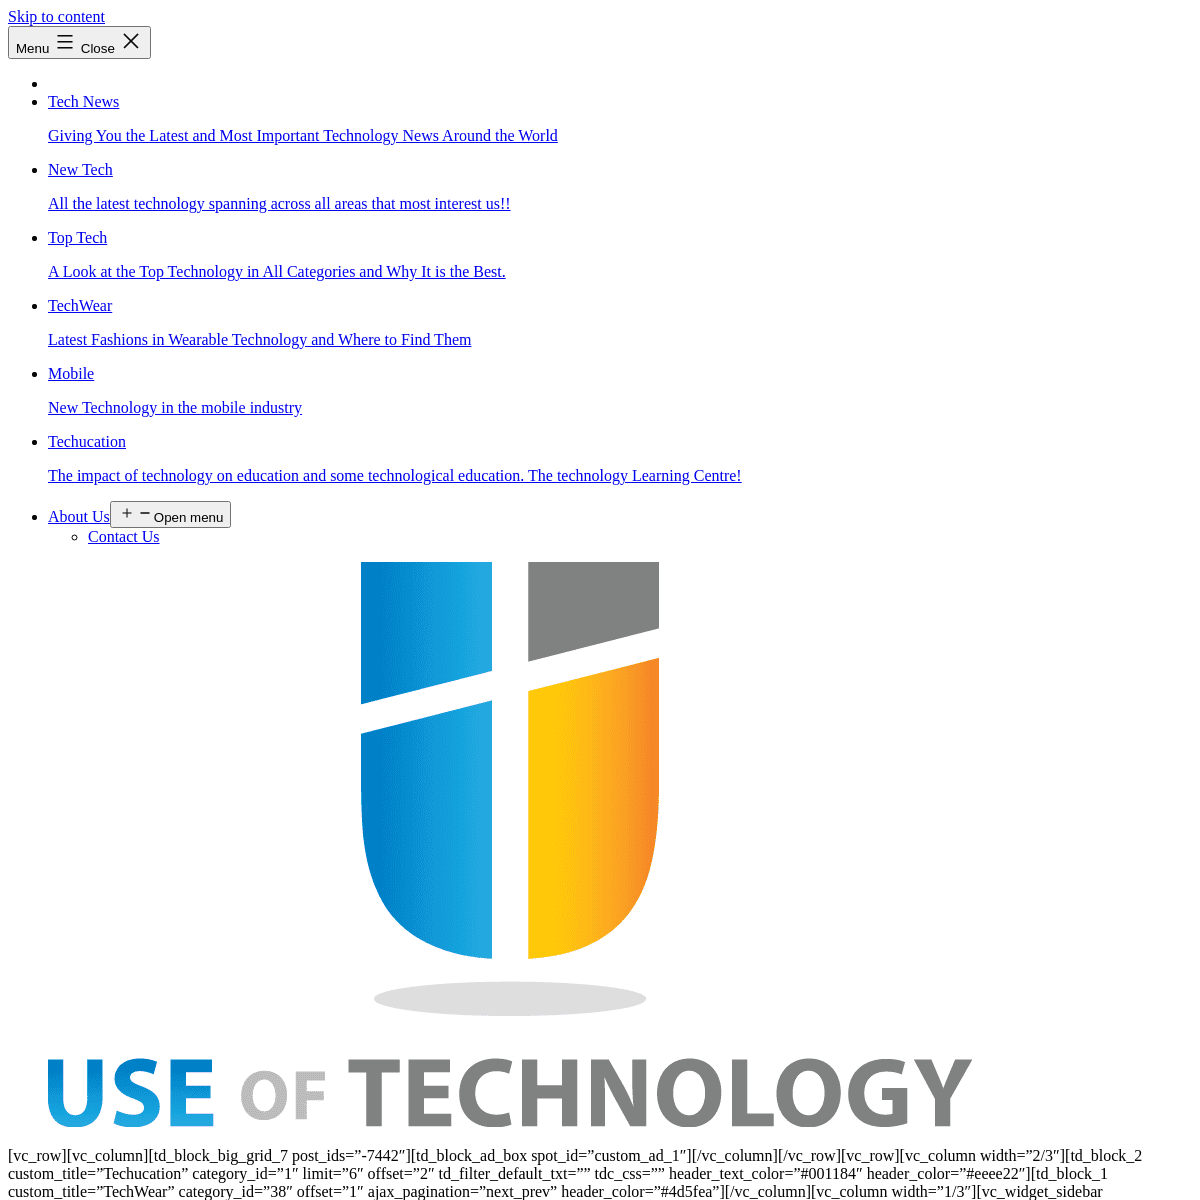 A complete backup of https://useoftechnology.com